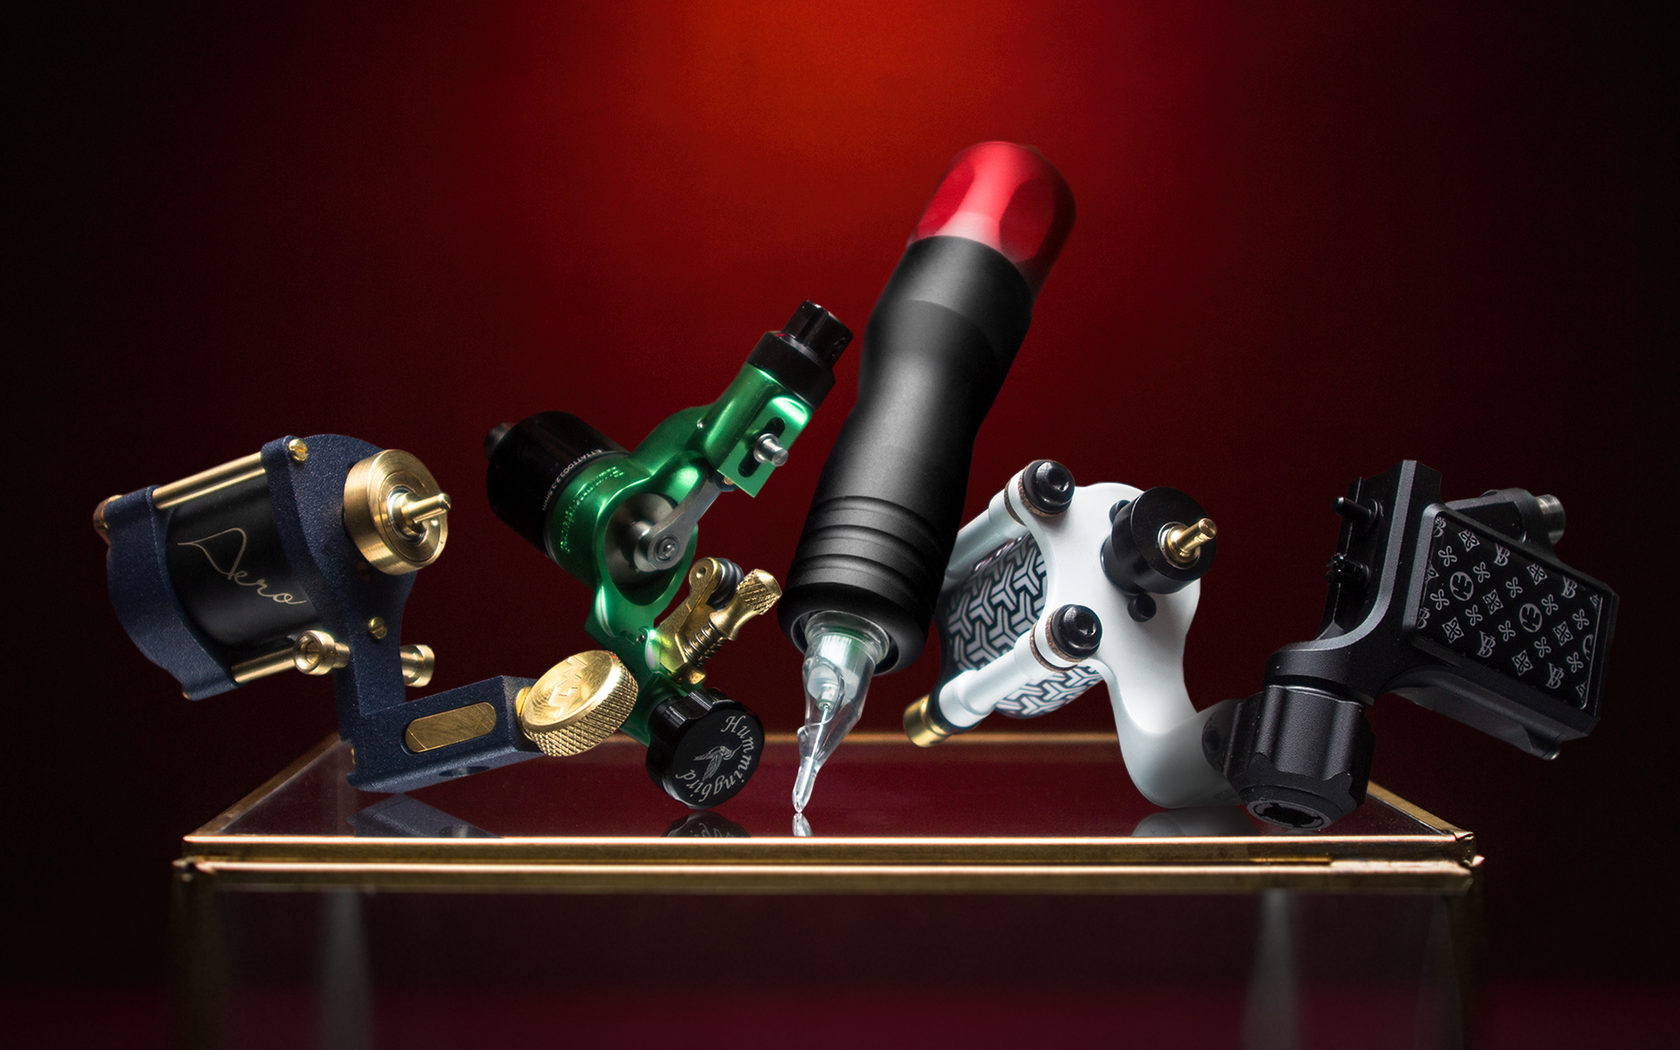 Want the best rotary tattoo machine? Check out these top 5 picks